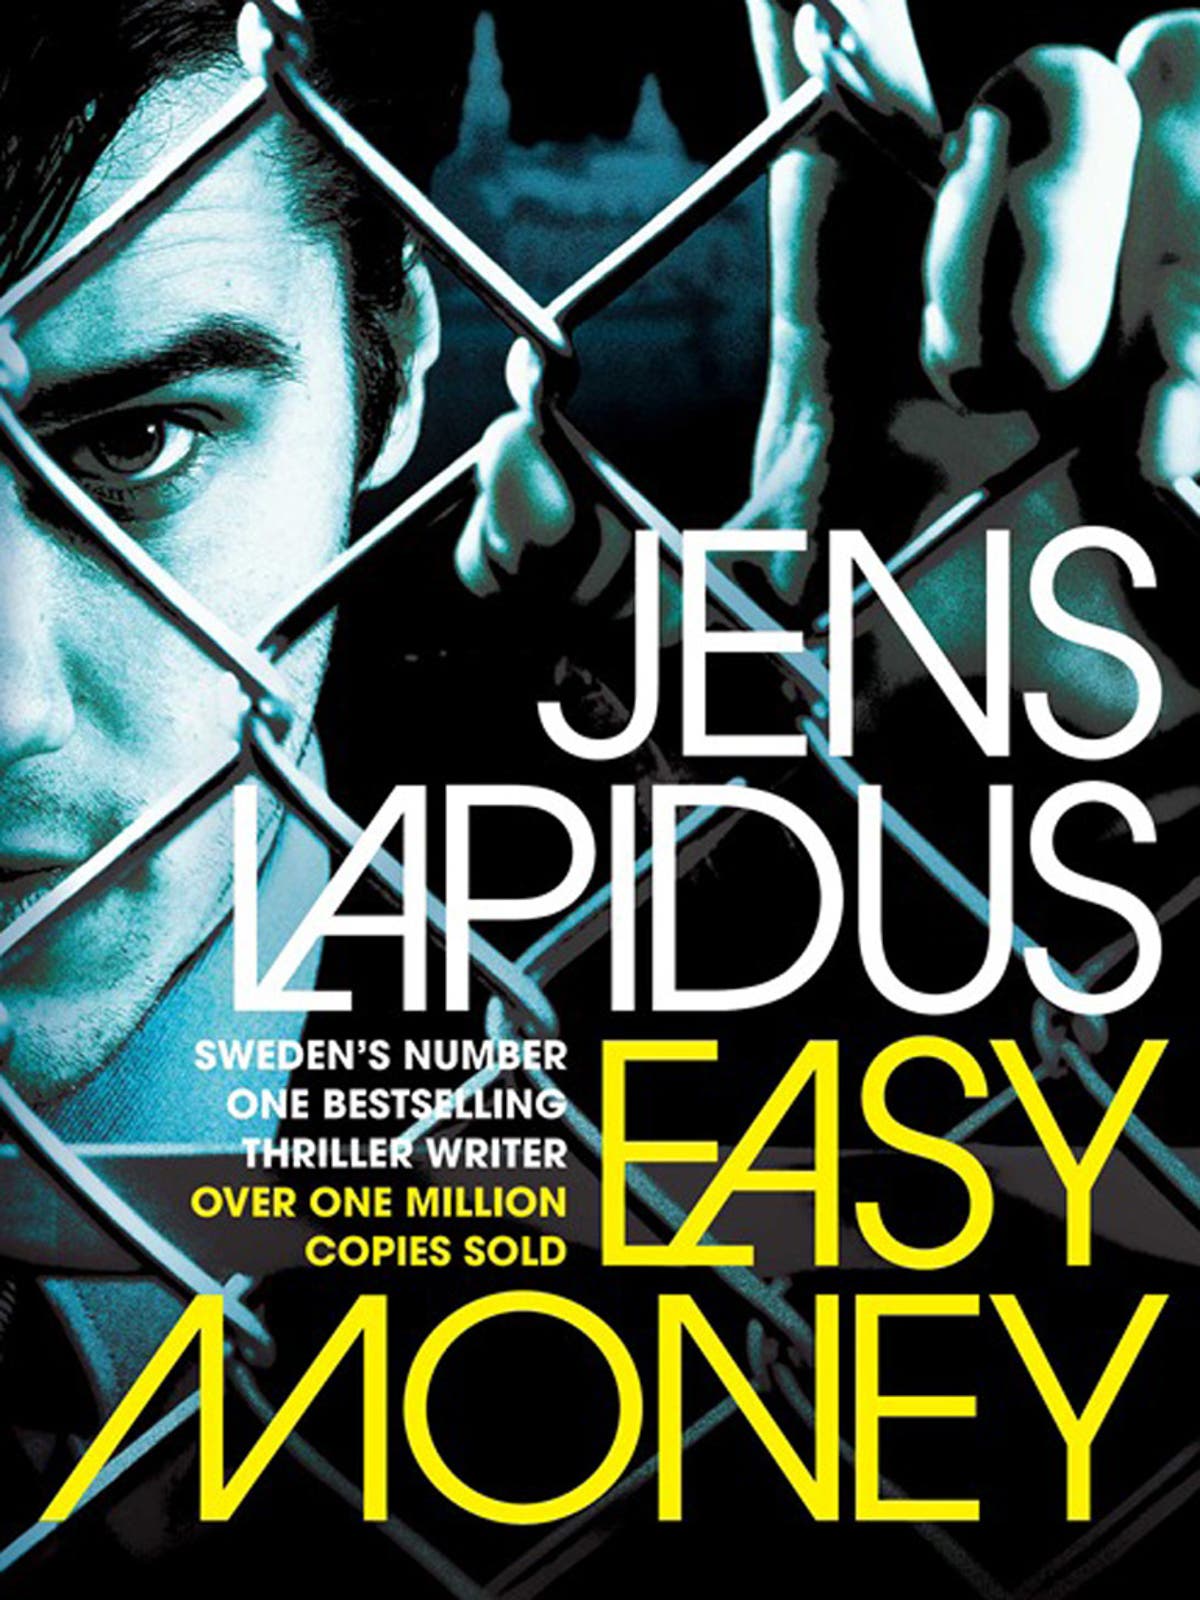 Book Review: “Easy Money”